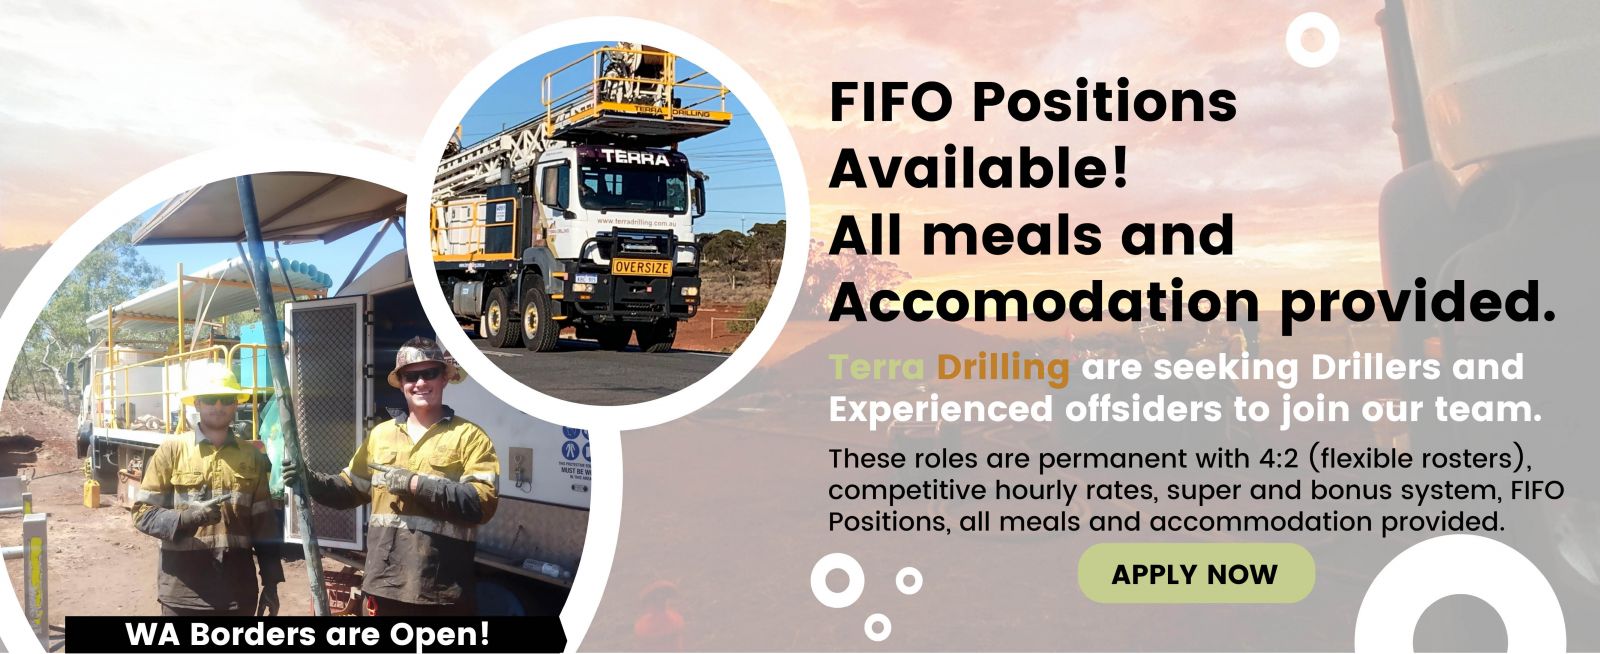 FIFO Positions Available at Terra Drilling - Drillers Offsiders